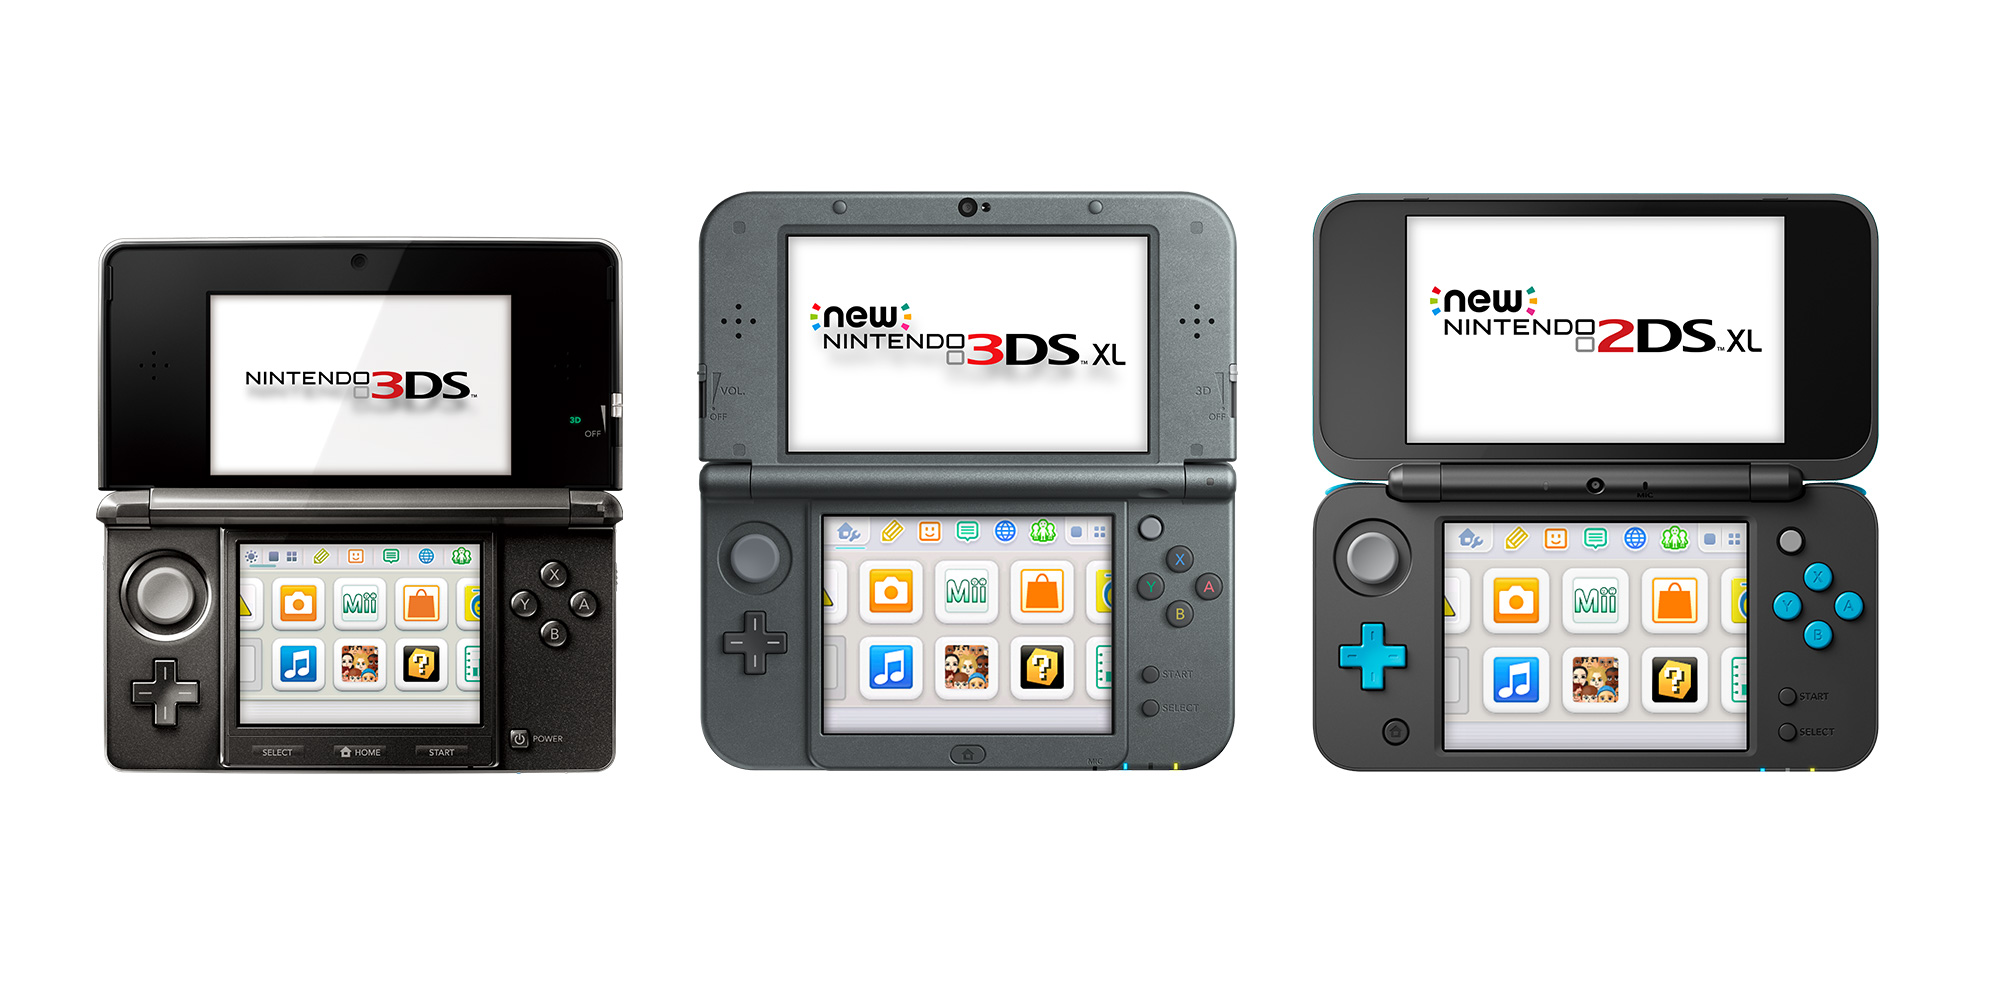 New Nintendo 3ds Xl Specifications